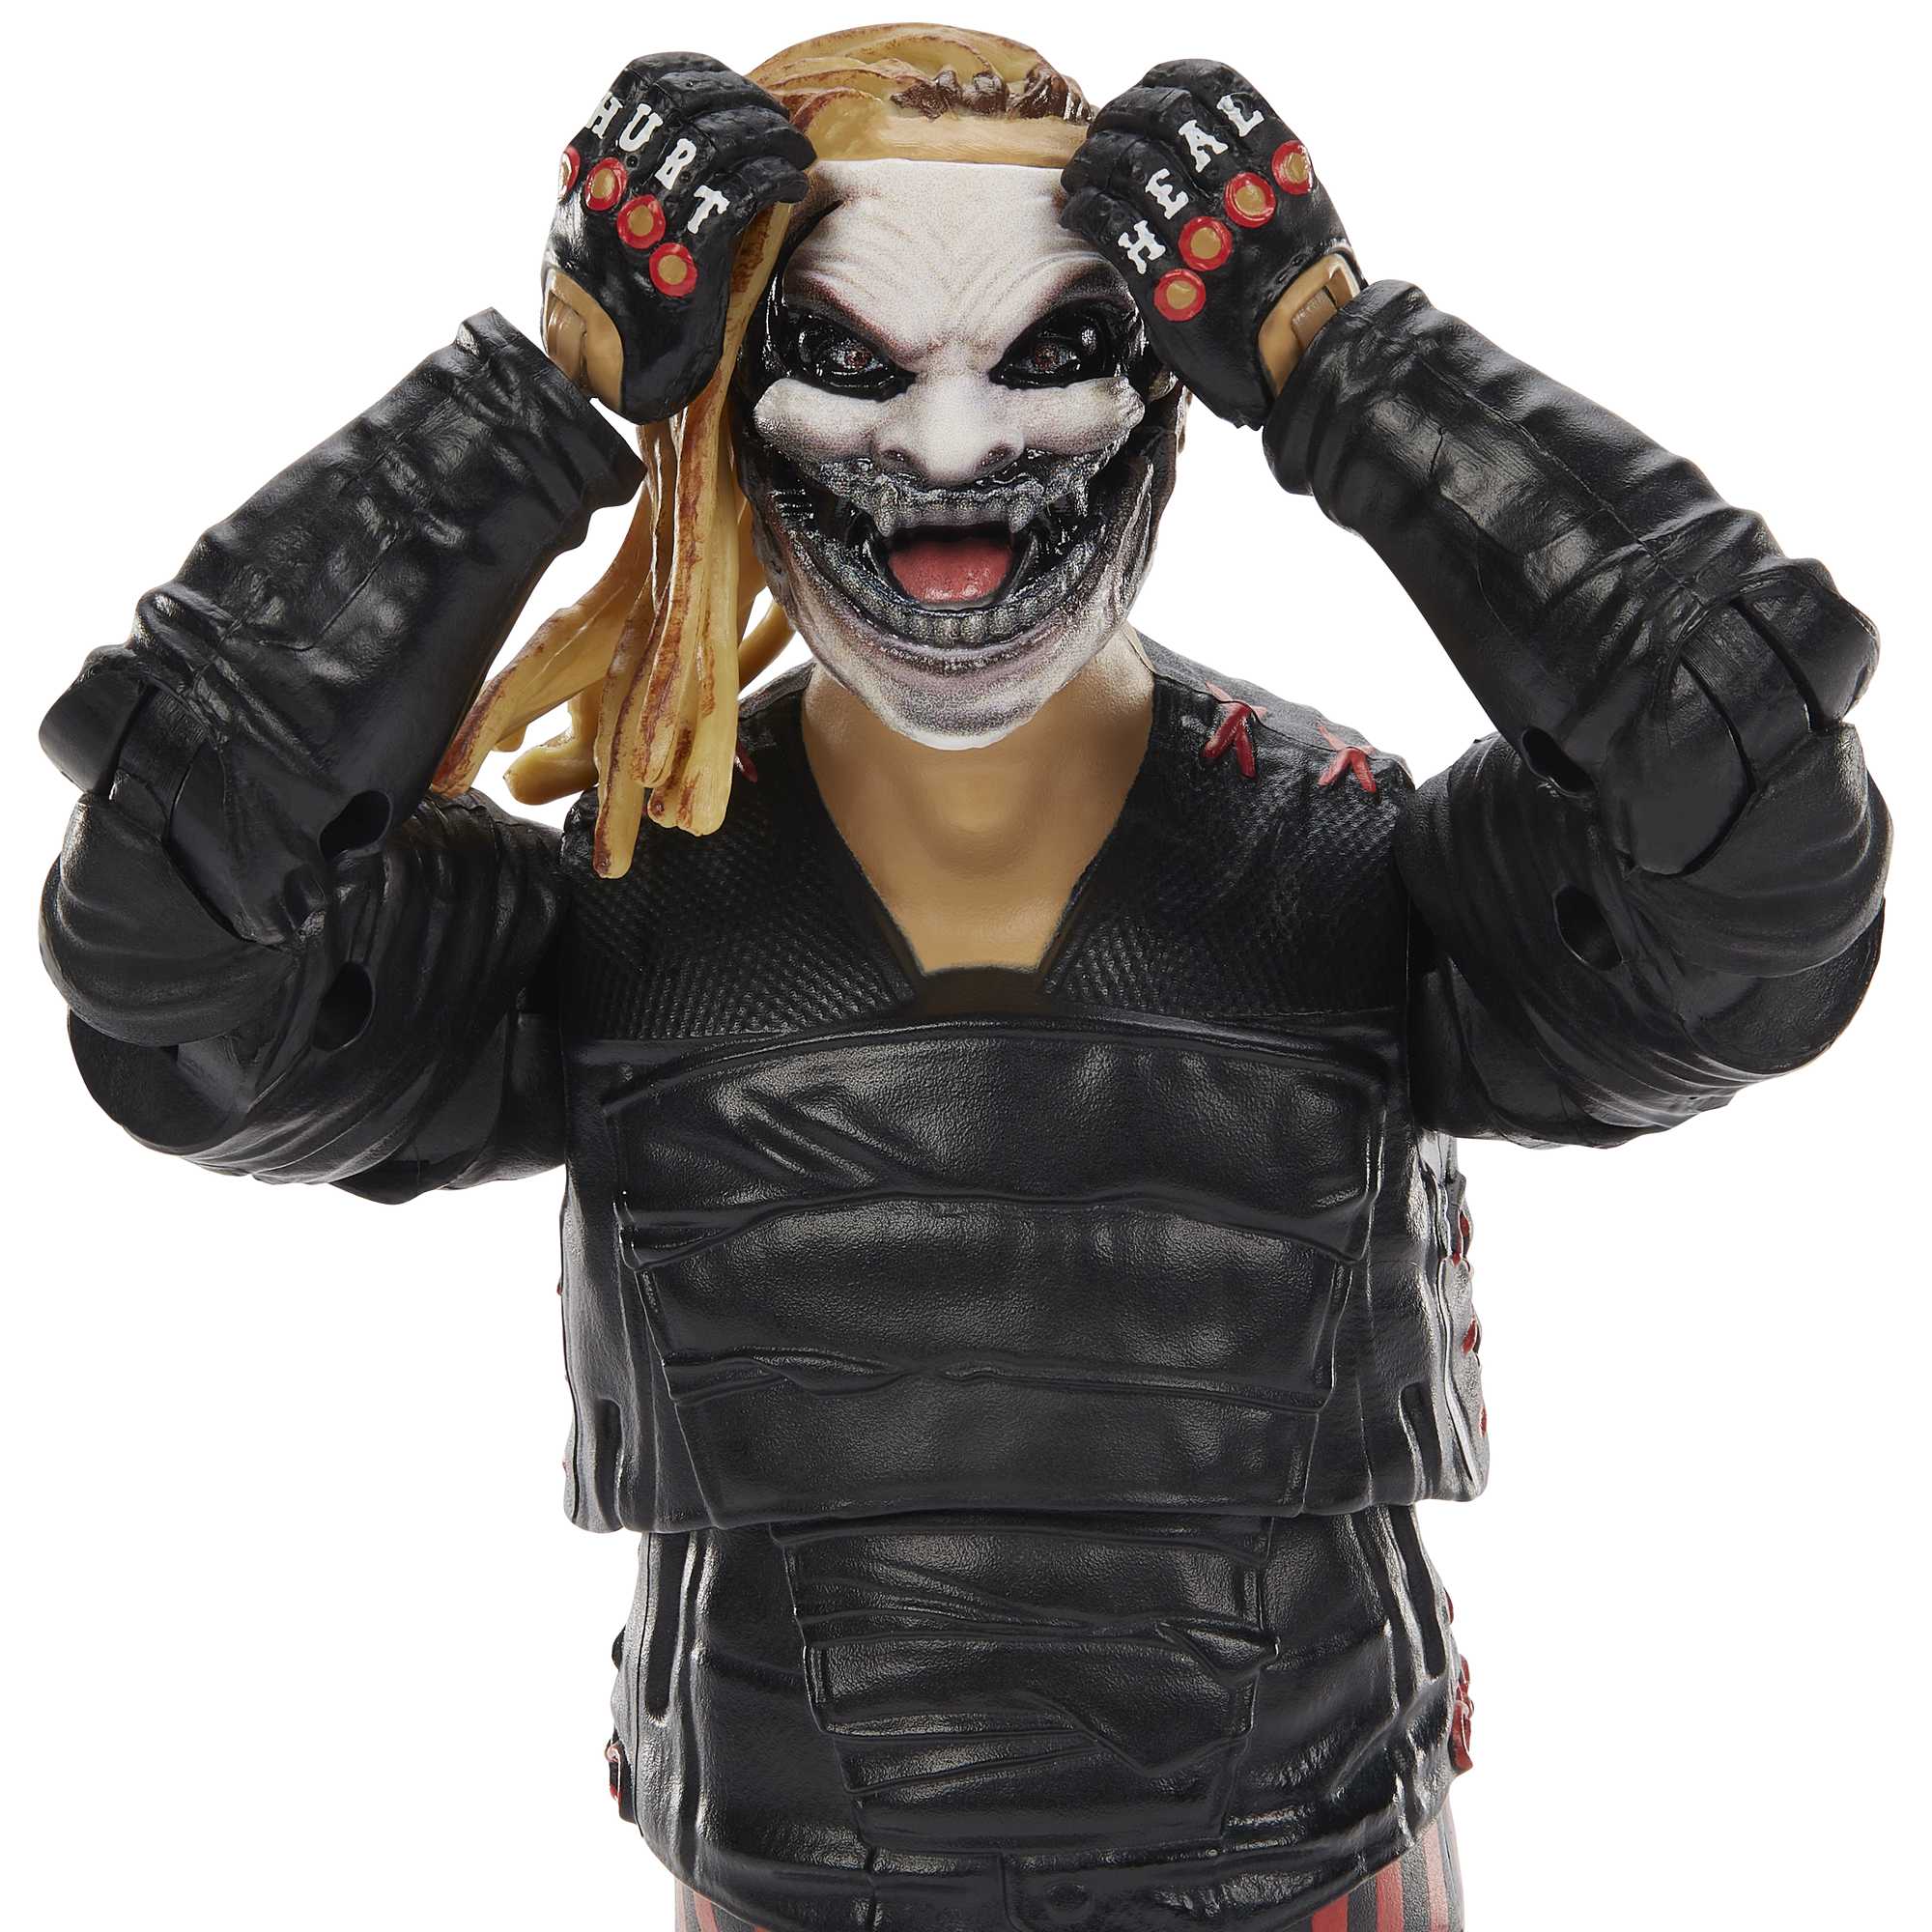 WWE 'The Fiend' Bray Wyatt Ultimate Edition Action Figure